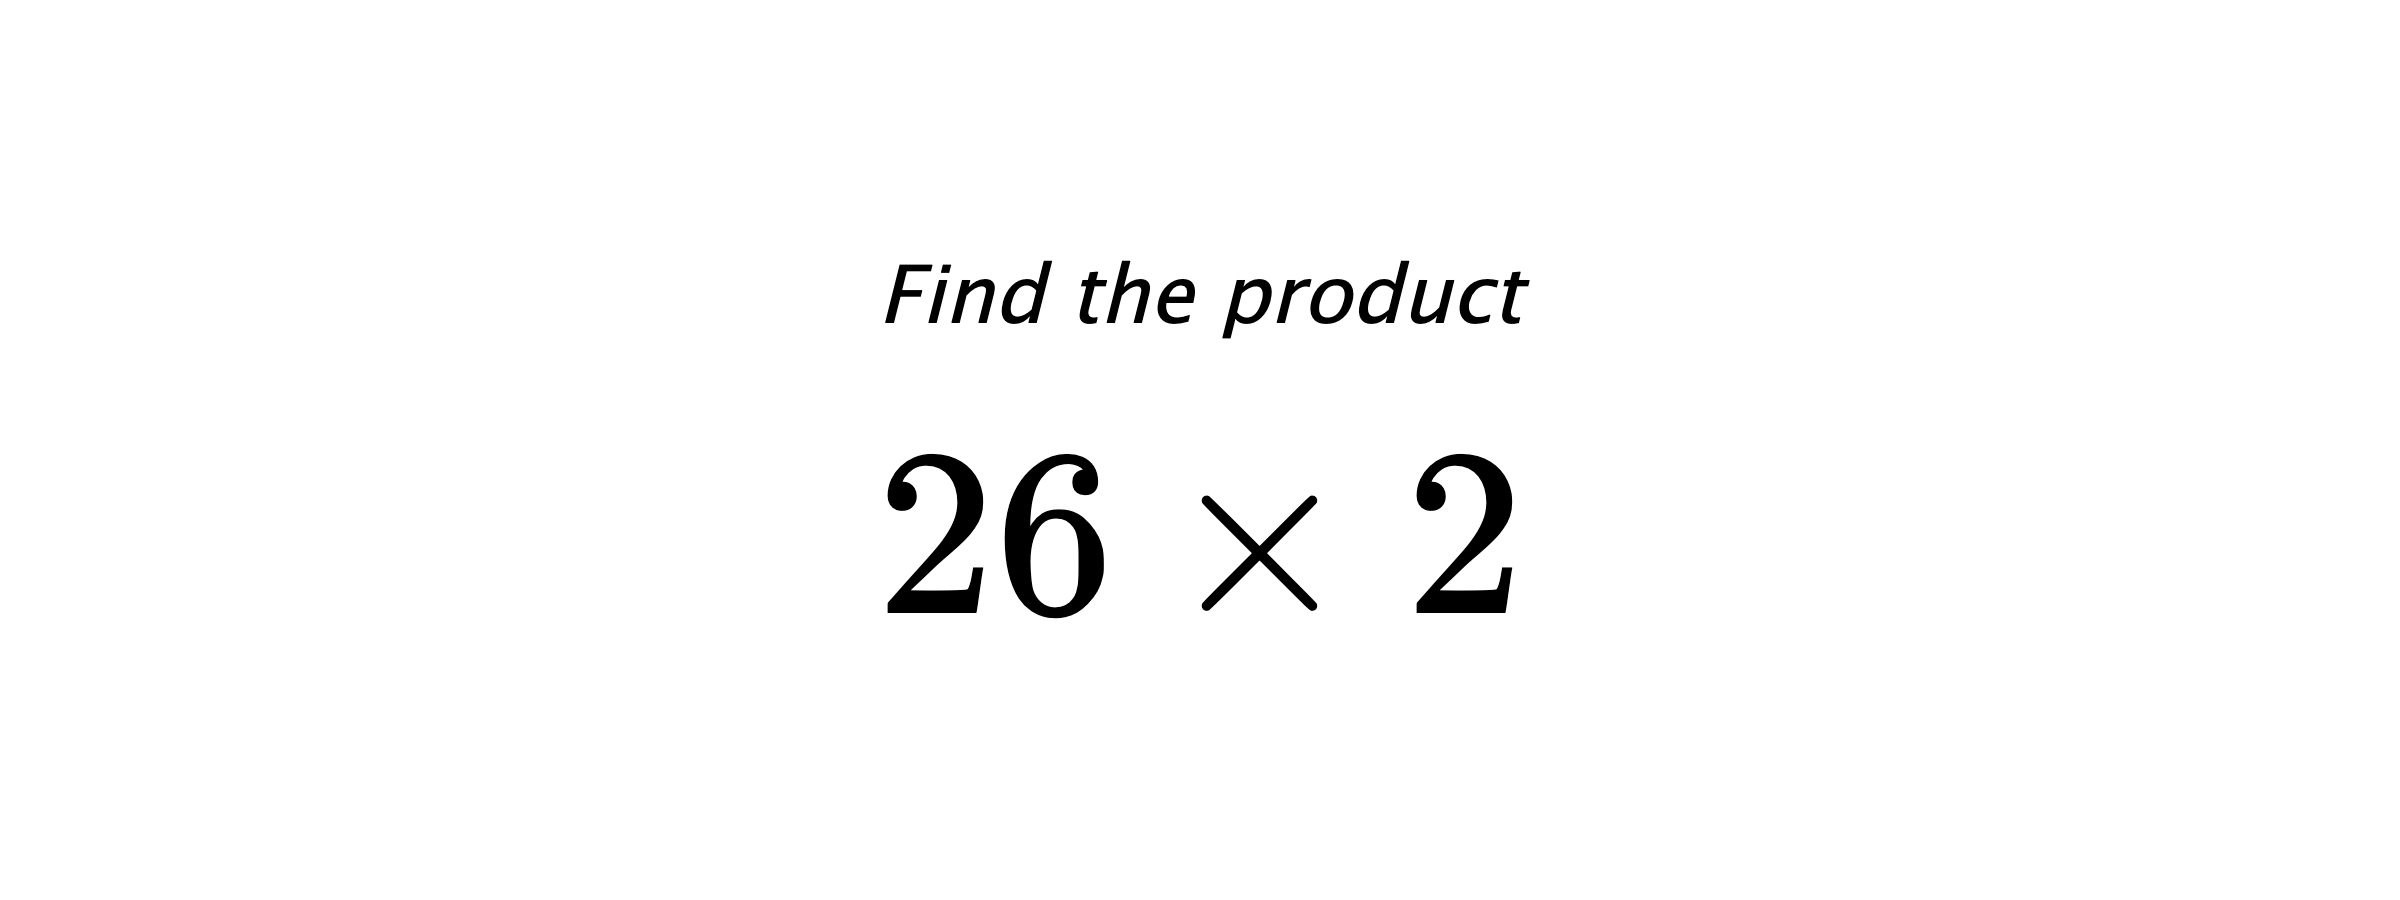 Find the product $ 26 \times 2 $